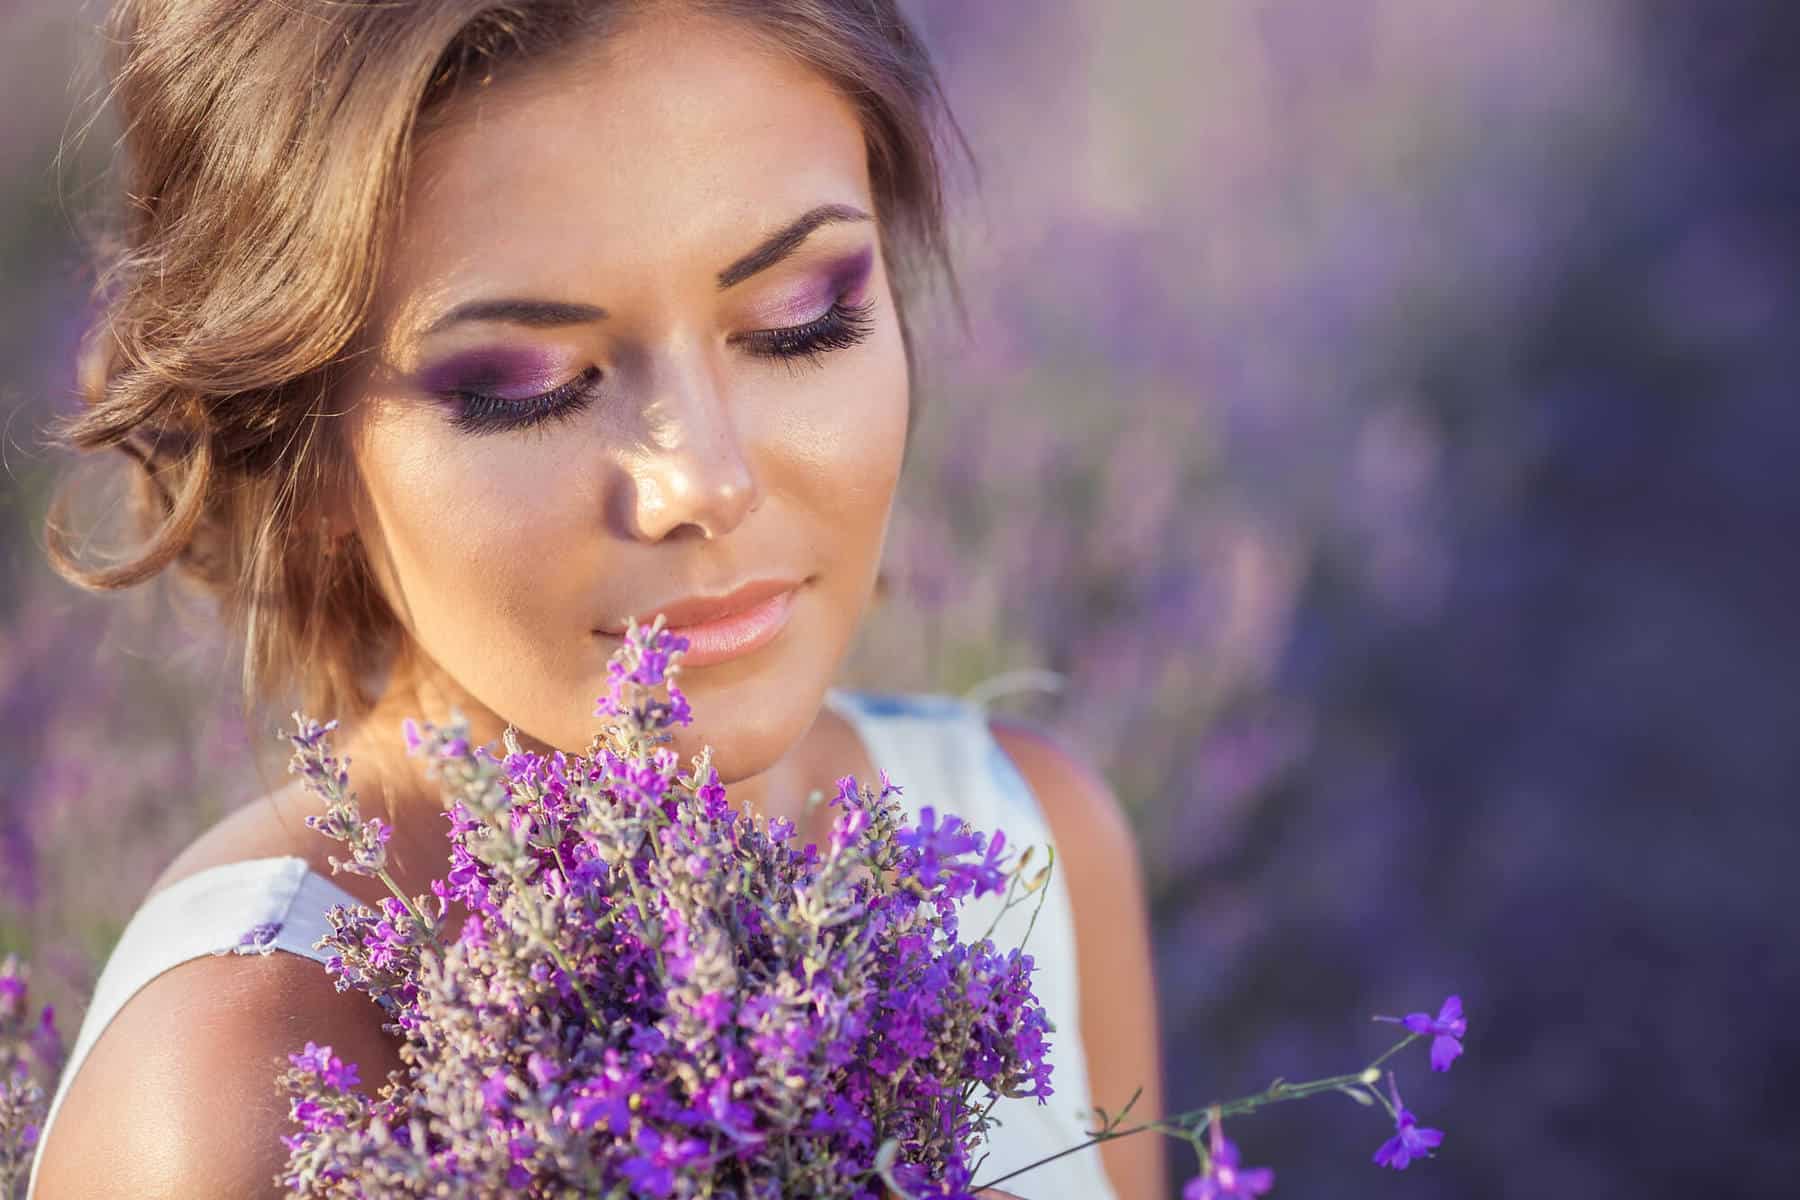 Woman relaxing with lavender